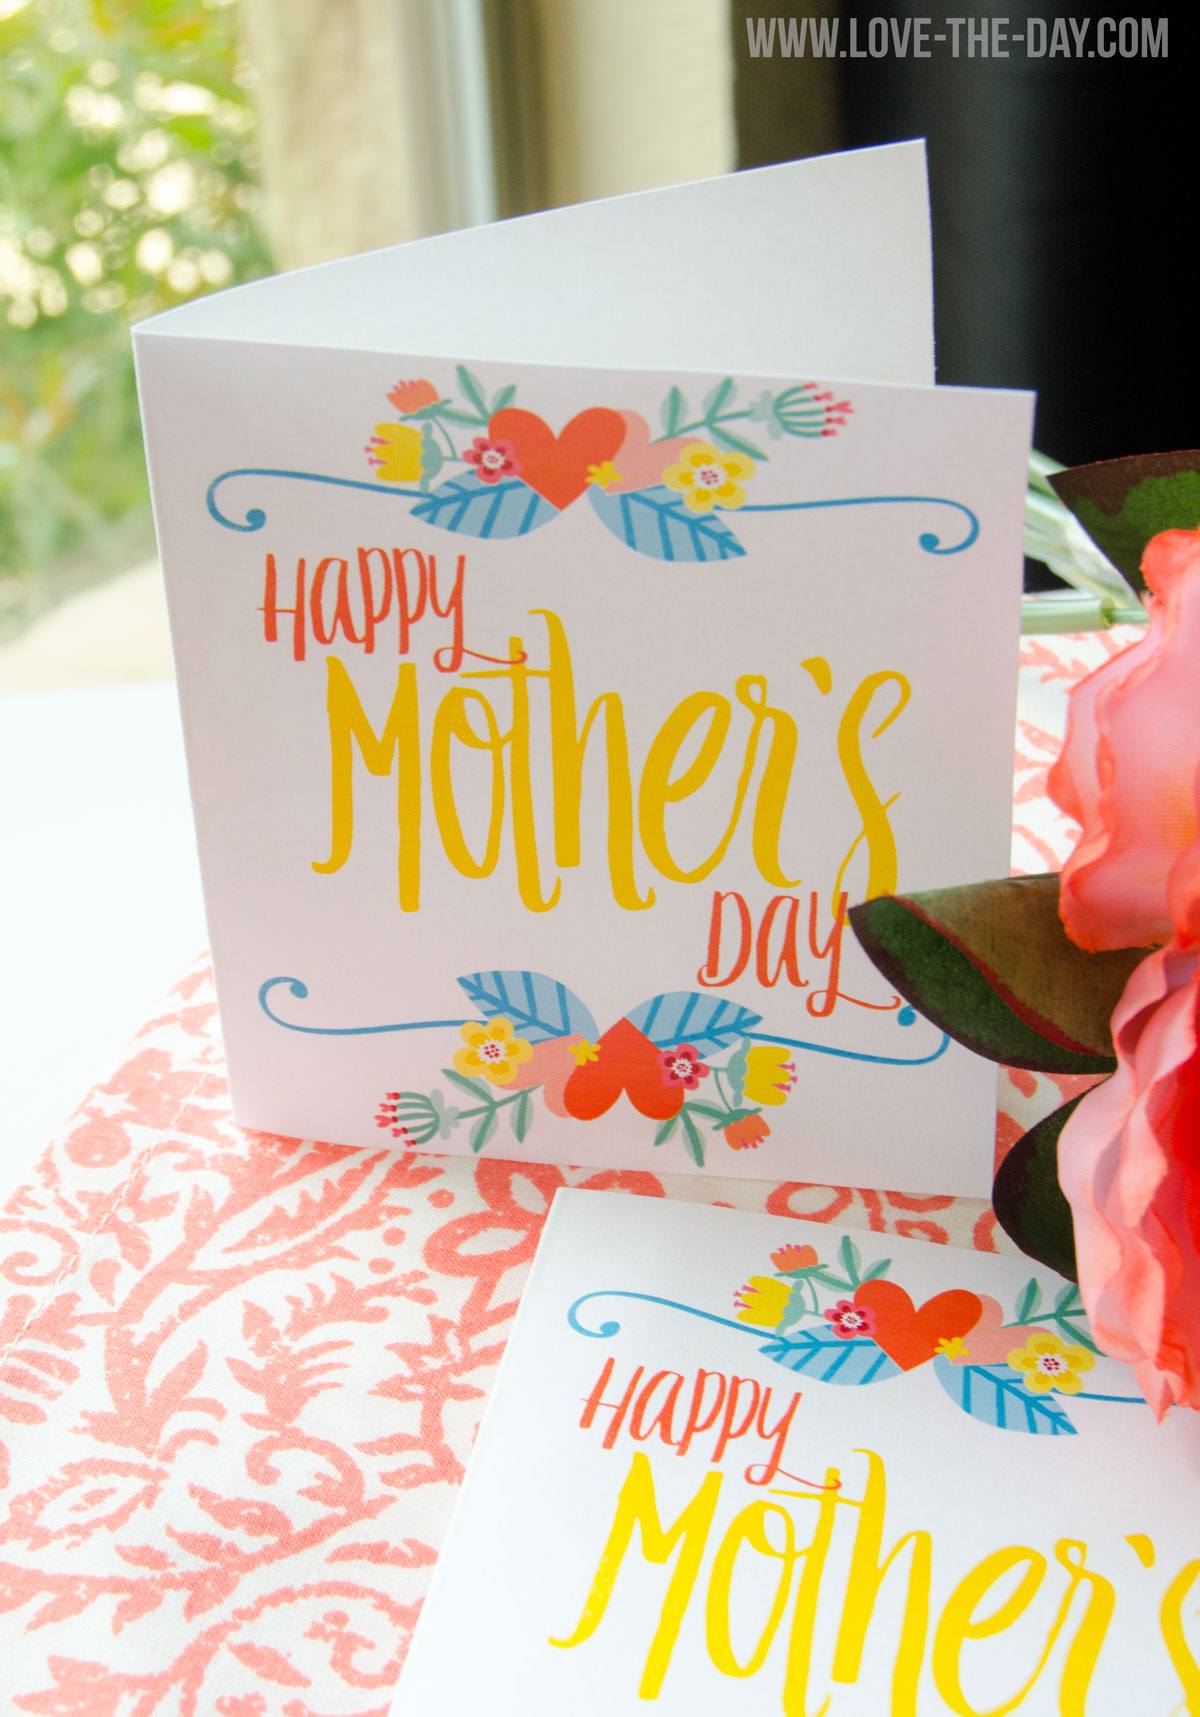 FREE PRINTABLE Mother's Day Card by Lindi Haws of Love The Day